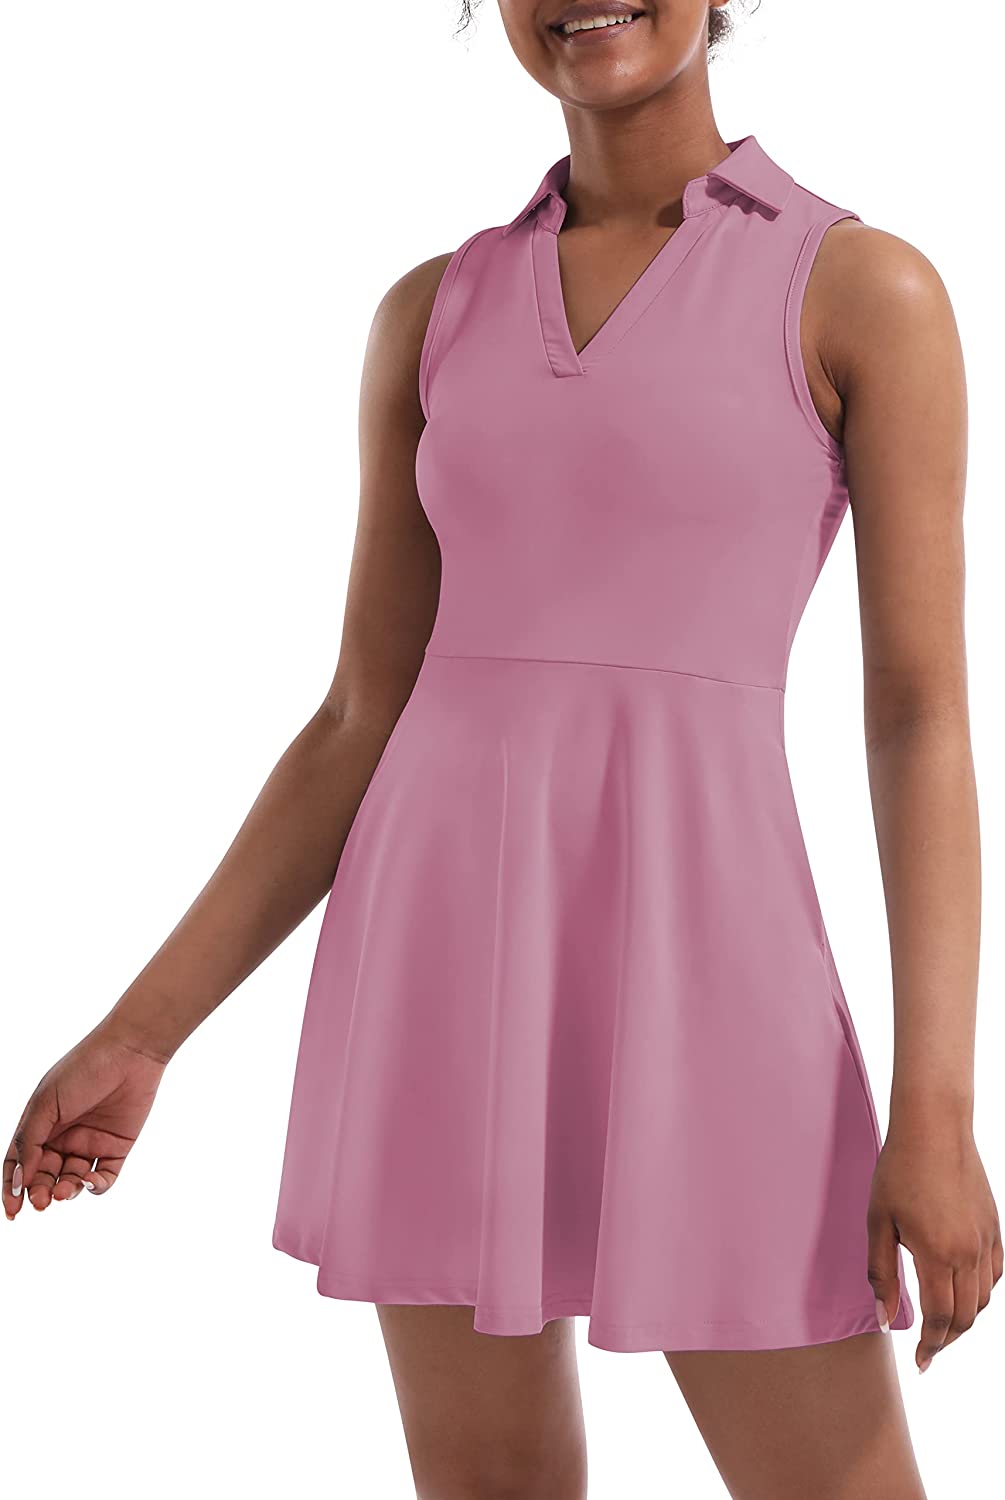 Fengbay Tennis Dress for Women,Golf Dresses with Built in Shorts with 4  Pockets